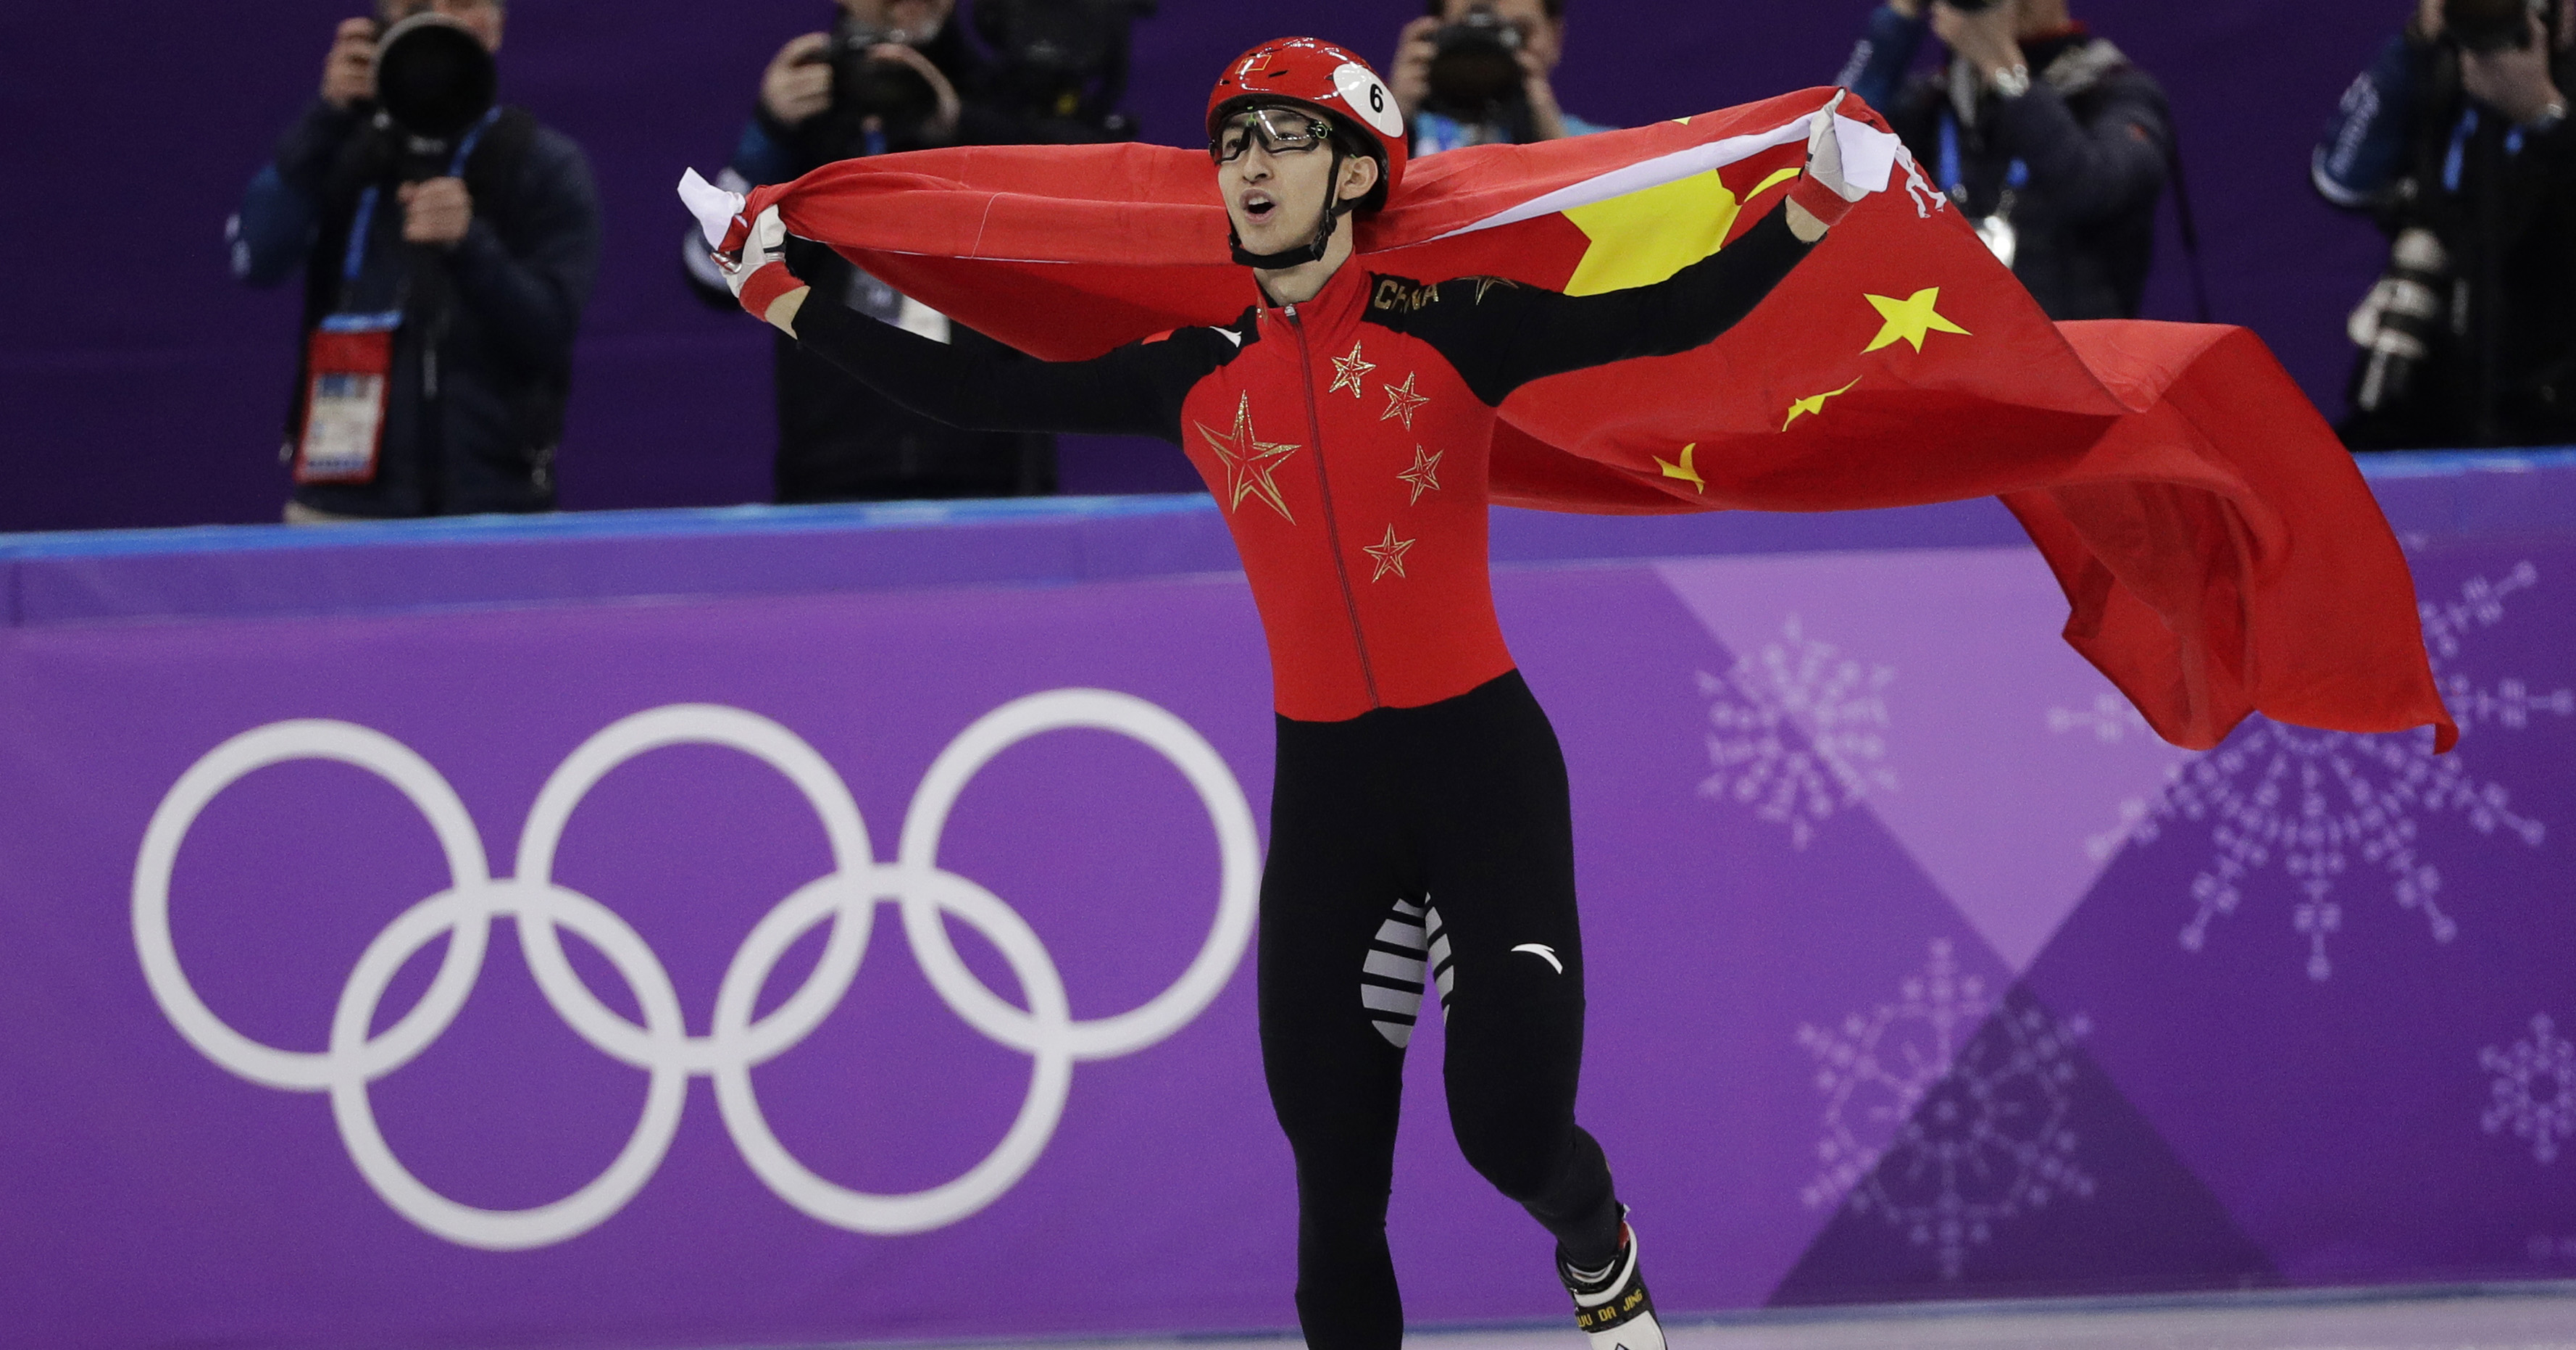 Wu Dajing of China celebrates after winning the men's 500 meters short track speedskating A final in the Gangneung Ice Arena at the 2018 Winter Olympics in Gangneung, South Korea, Thursday, Feb. 22, 2018. (AP Photo/David J. Phillip)